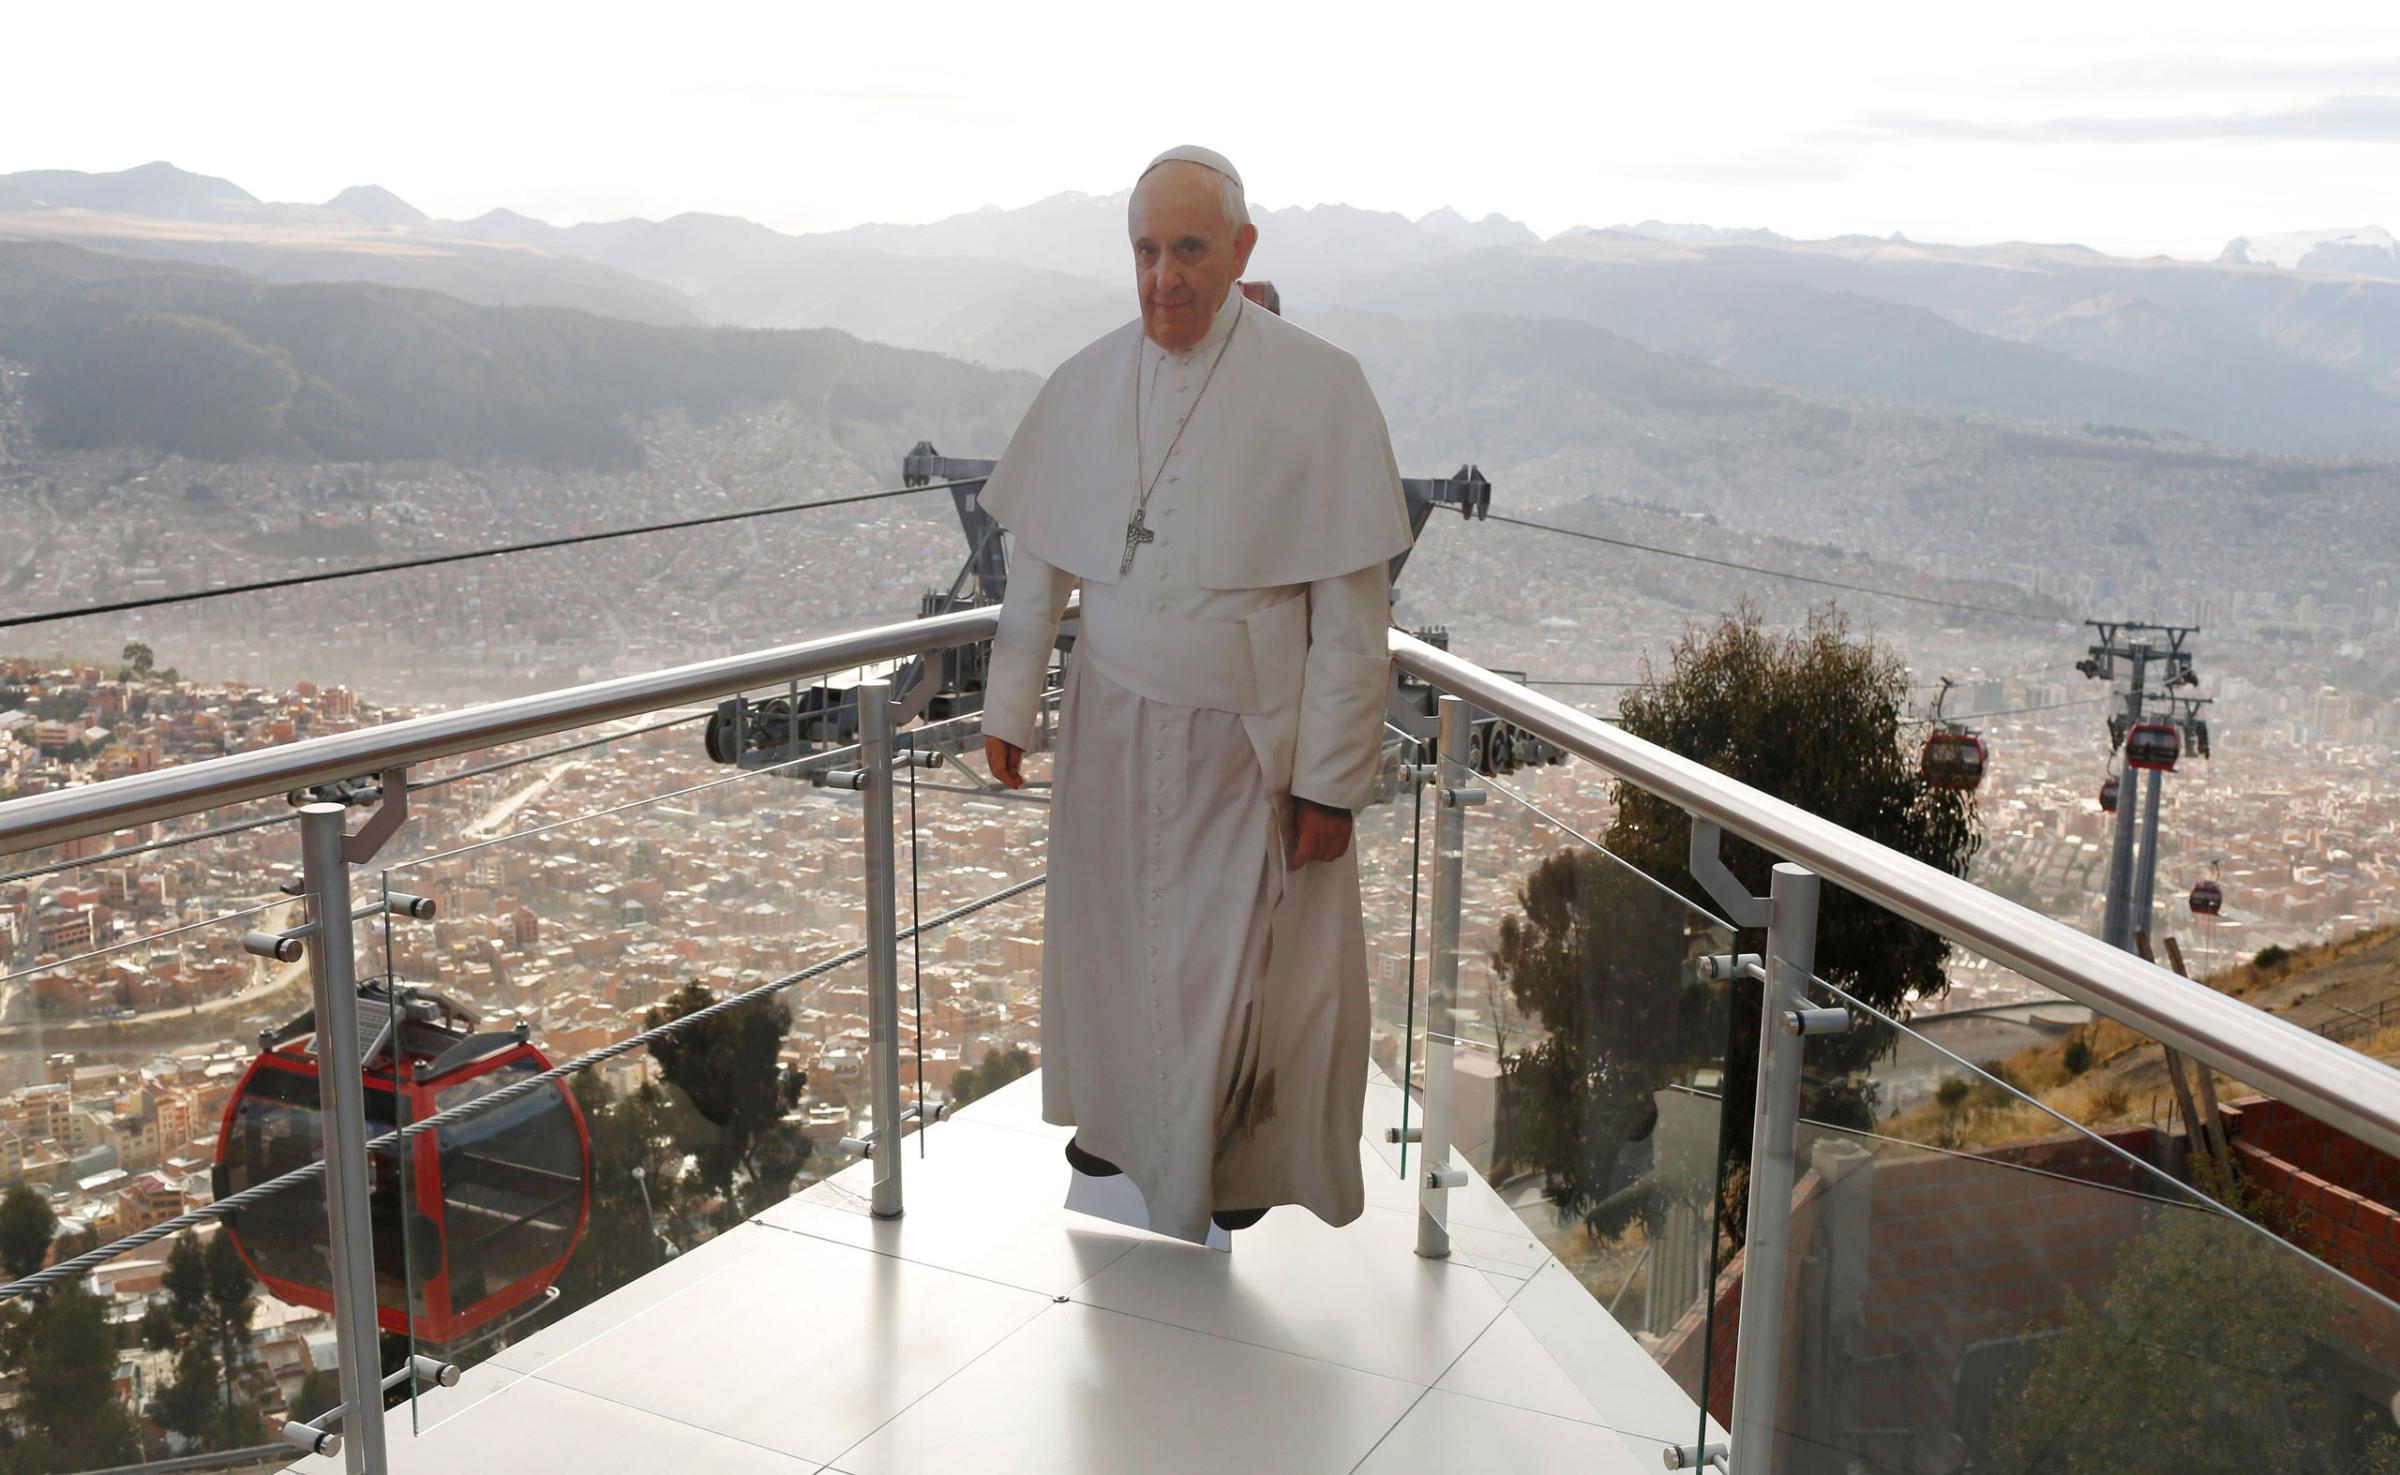 In this July 3, 2015 photo, a life-size cutout image of Pope Francis stands over La Paz, seen from the cable car platform in El Alto, placed there by the transportation workers for commuters to pose with for photos, part of the city's promotion of the pope's upcoming visit to Bolivia. The pope's trip to South America that includes Bolivia is set for July 5-12, though he will only spend four hours in Bolivia's capital due to the altitude, church officials say. (AP Photo/Juan Karita)